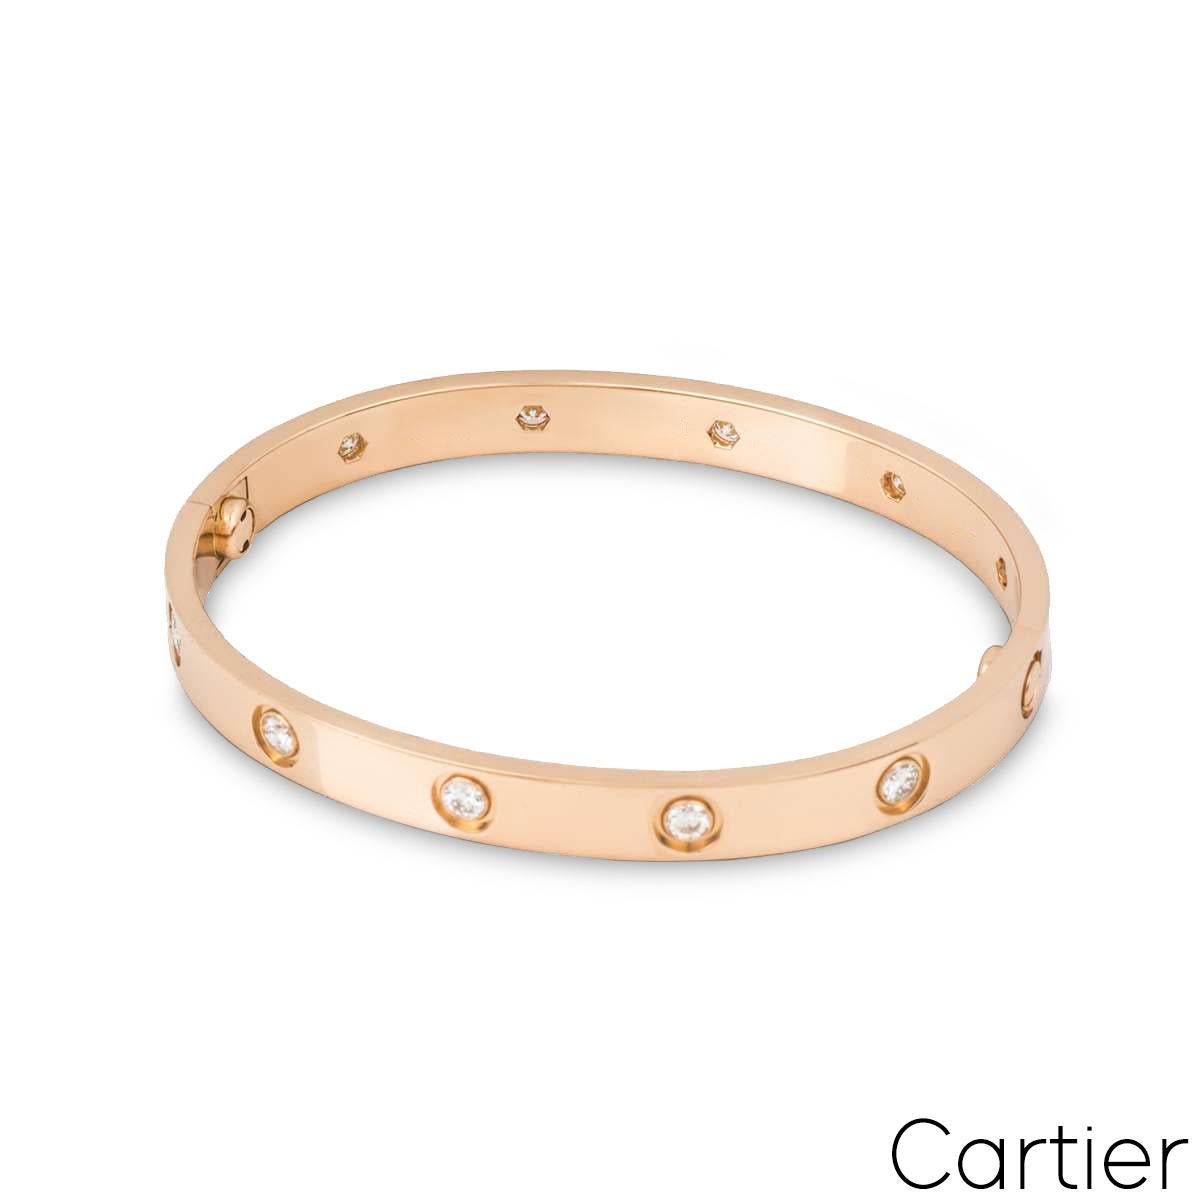 An 18k rose gold full diamond bracelet by Cartier from the Love collection. The bracelet is set with 10 round brilliant cut diamonds circulating the outer edge throughout in a rubover setting totalling 0.96ct. The bangle is a size 18 and features